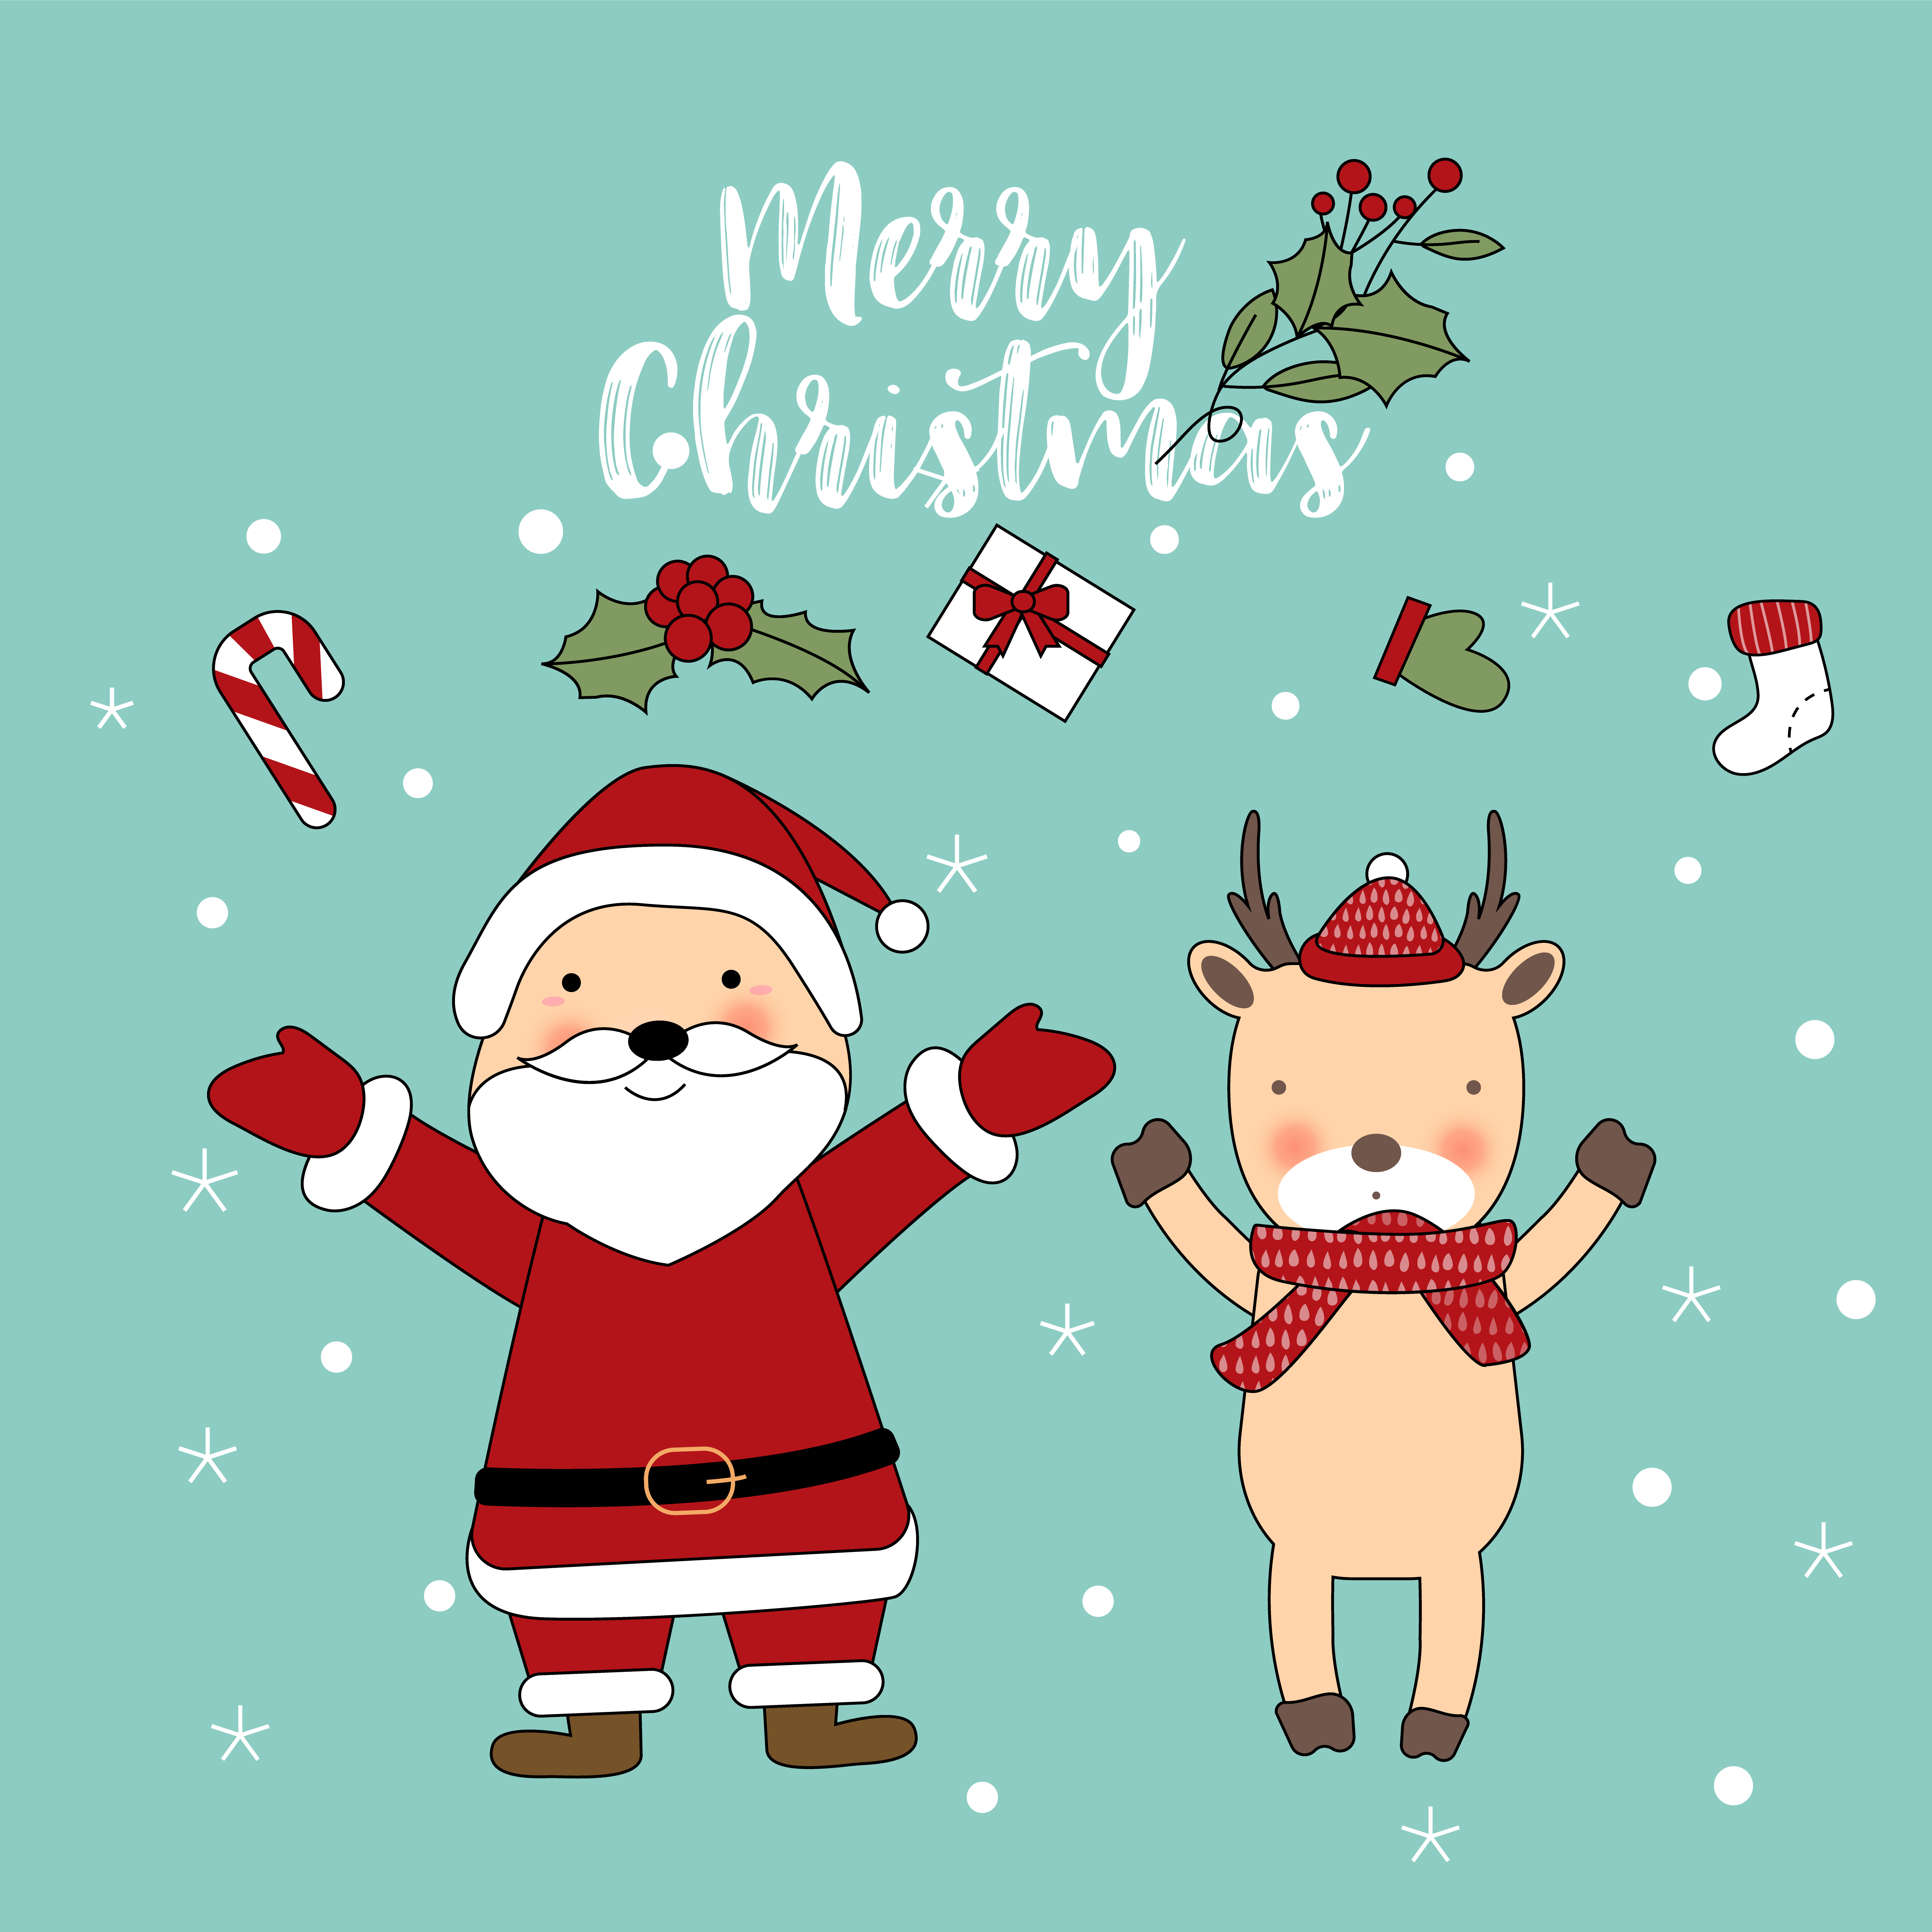 Download the Merry Christmas Cute Greeting Card 667374